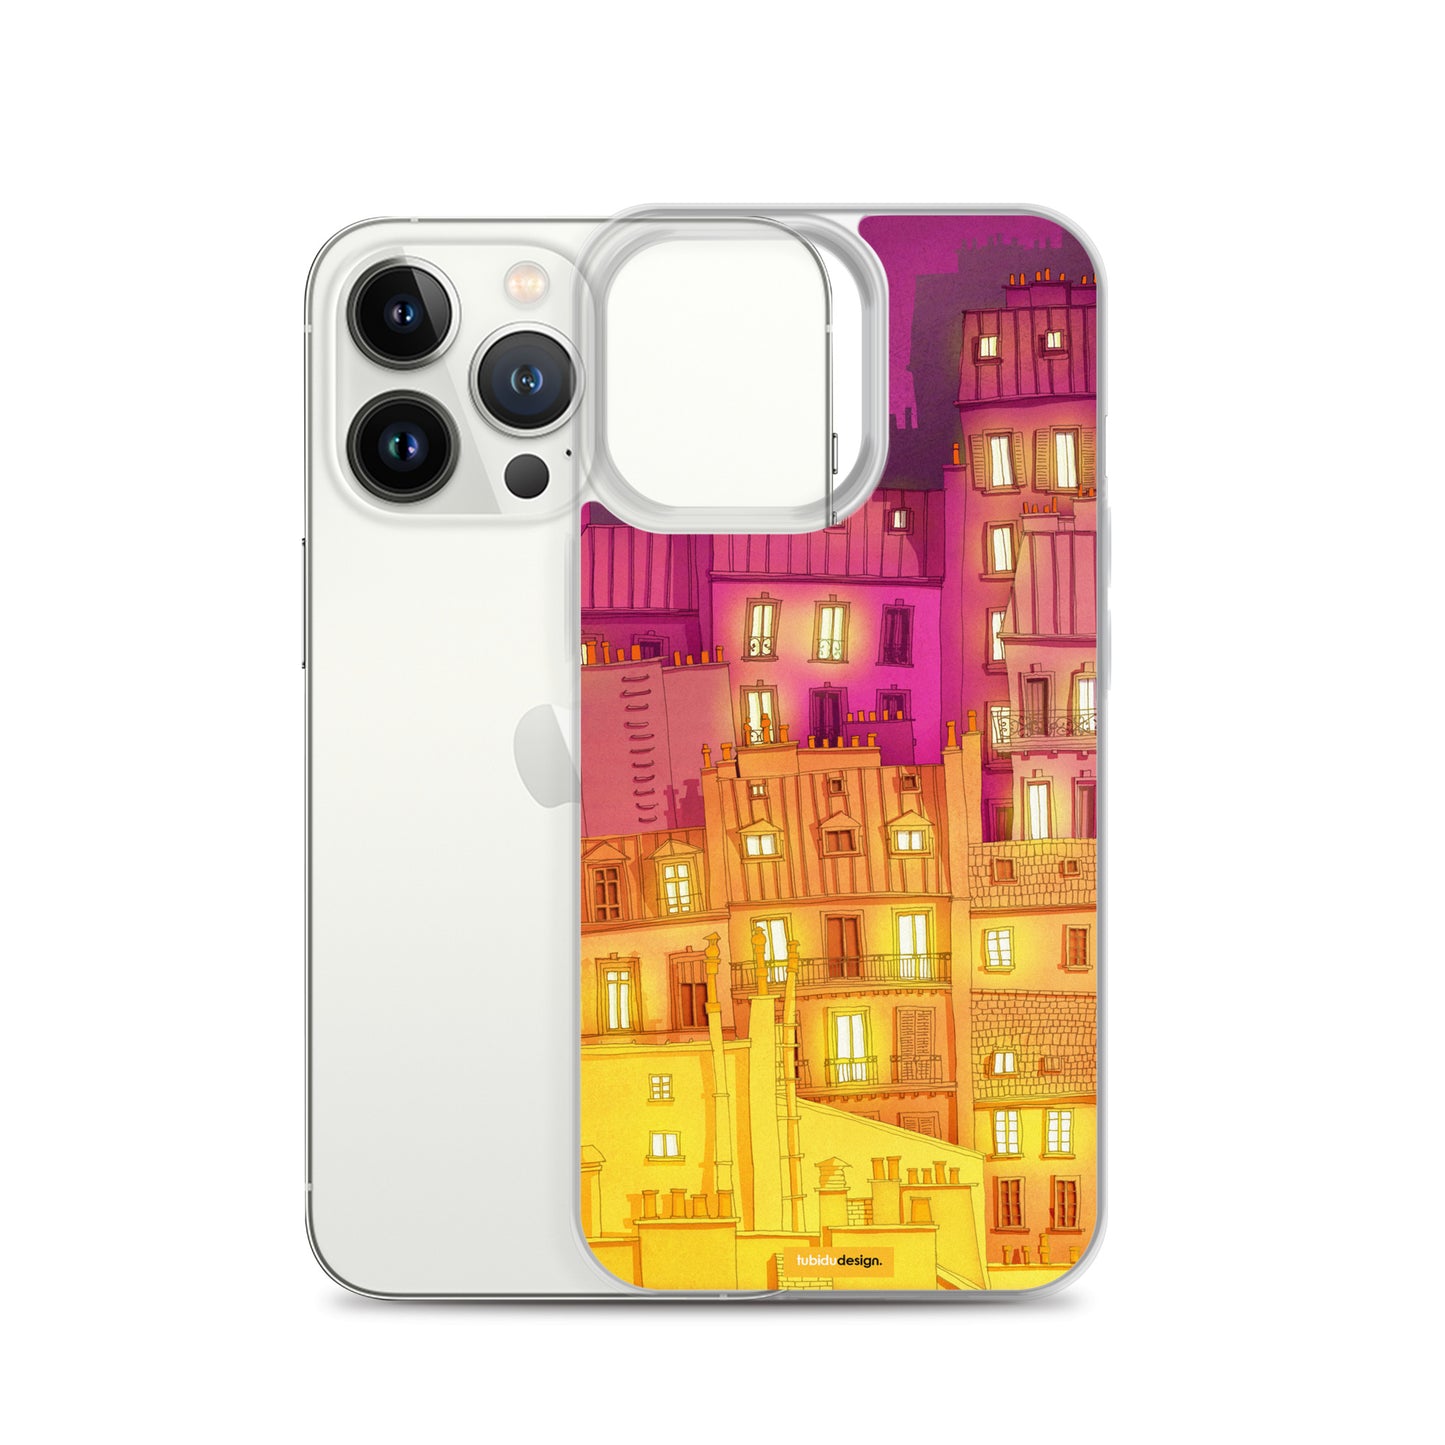 Montmartre at night - Illustrated iPhone Case